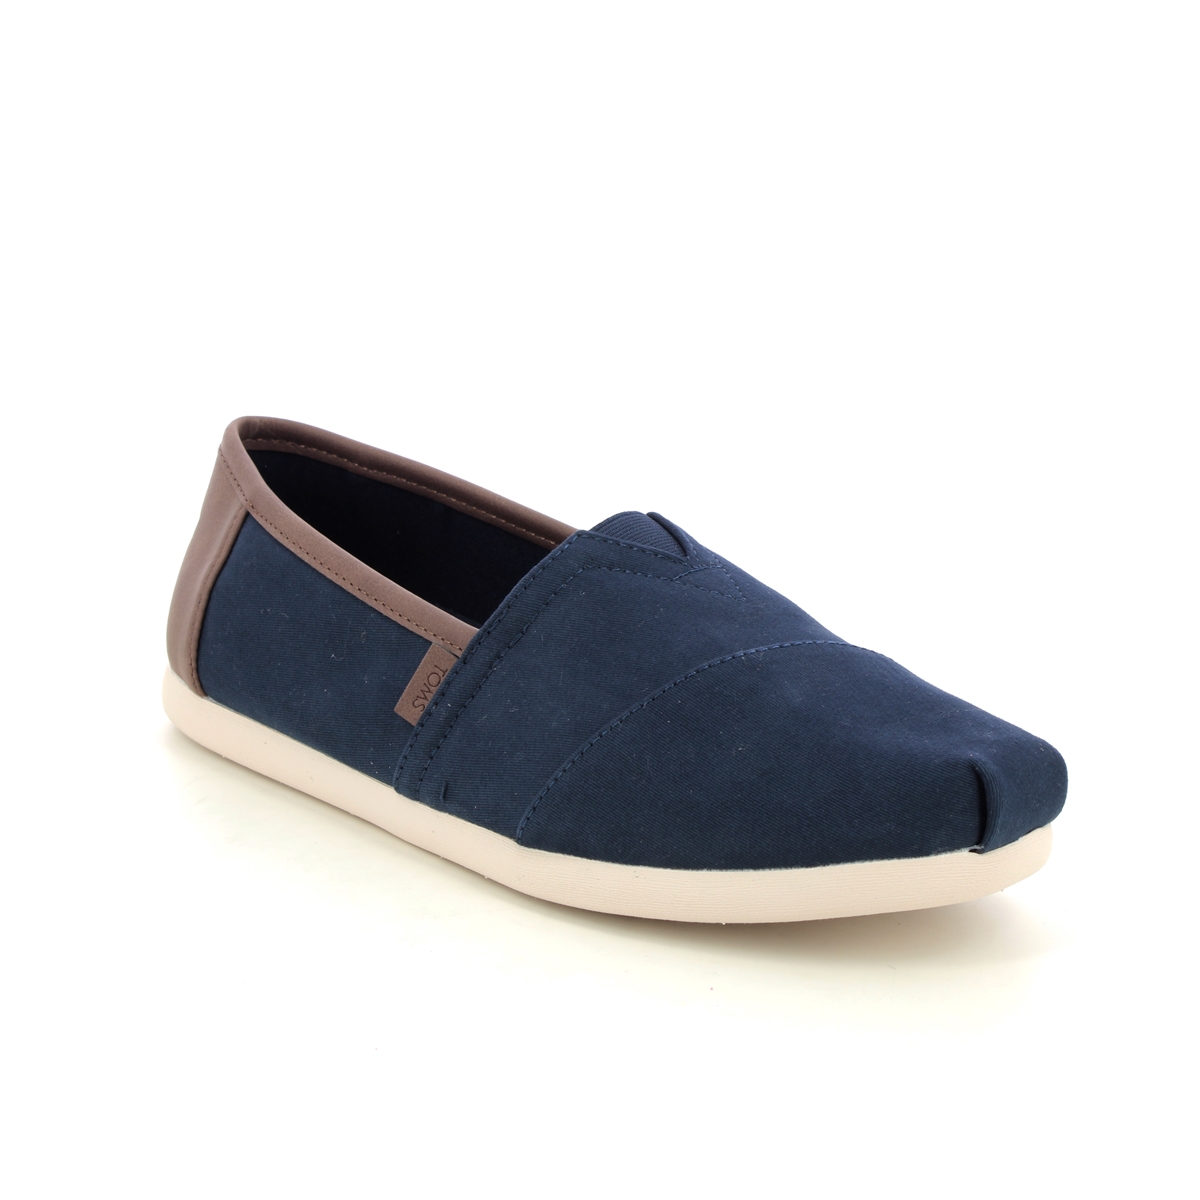 Toms Alpargata 3 Men Navy Brown Mens Closed Toe Sandals 10020866-75 in a Plain Canvas in Size 11